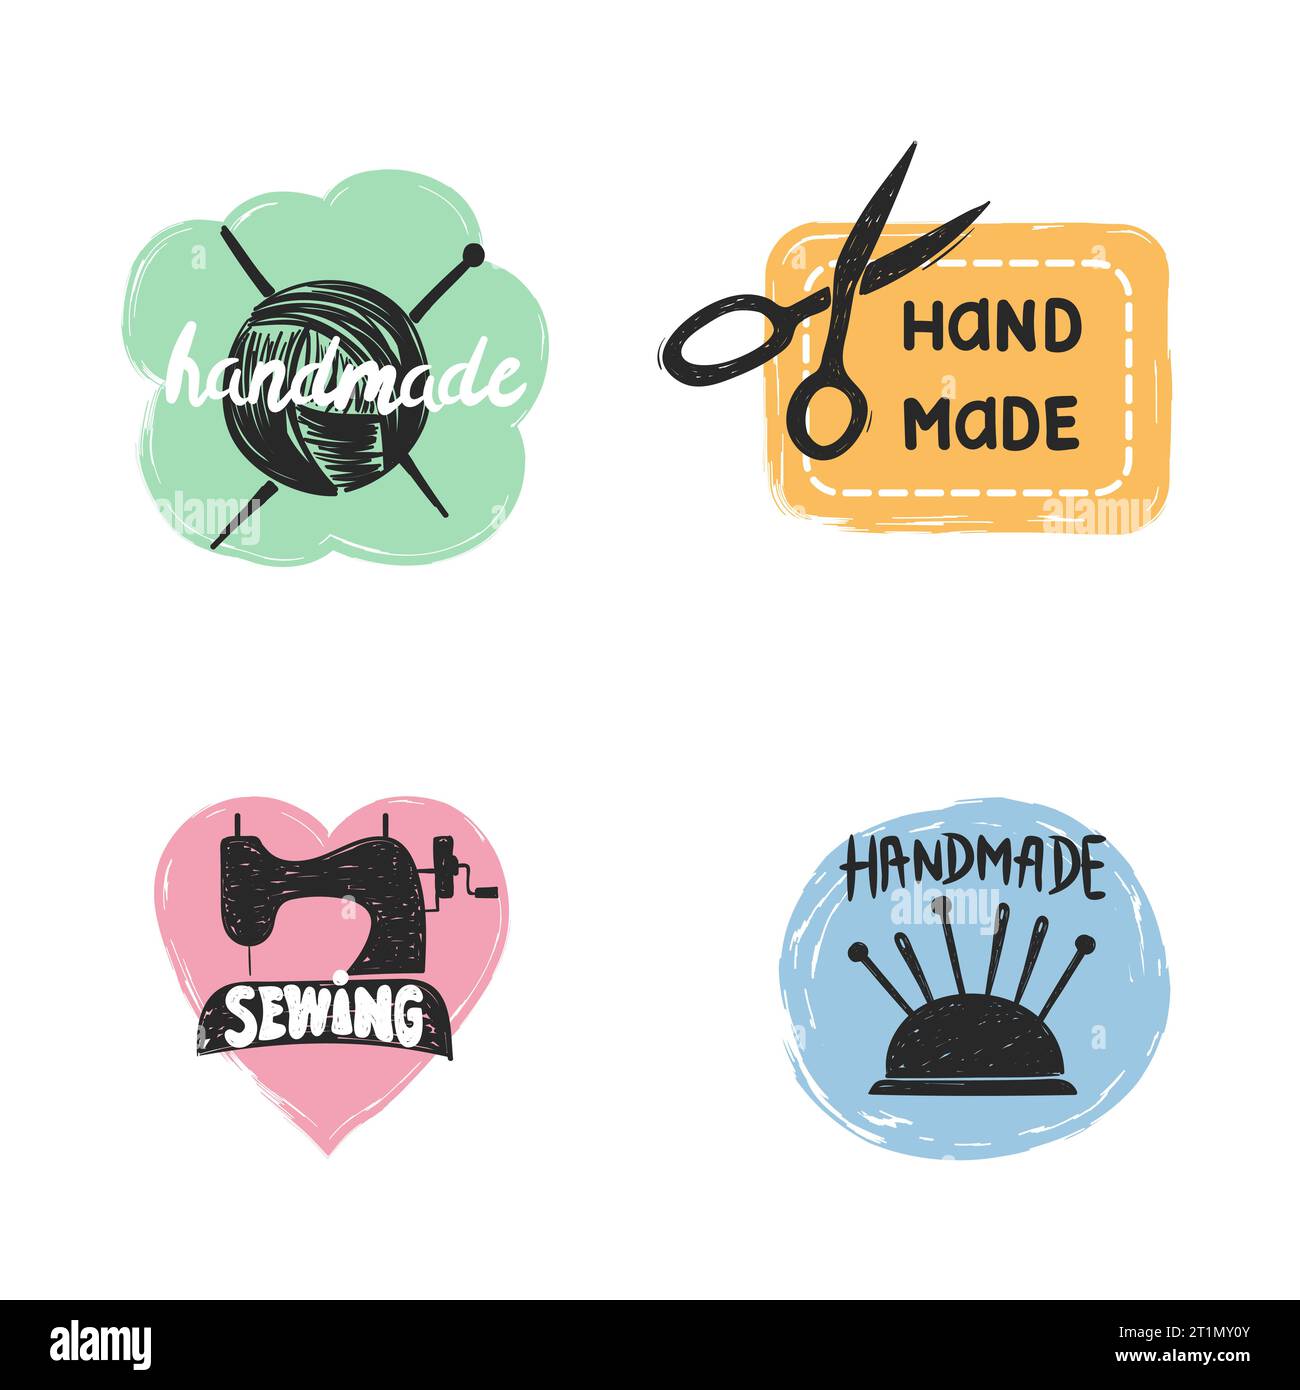 Handmade logo set. Sewing handcraft hobby workshop labels isolated on ...